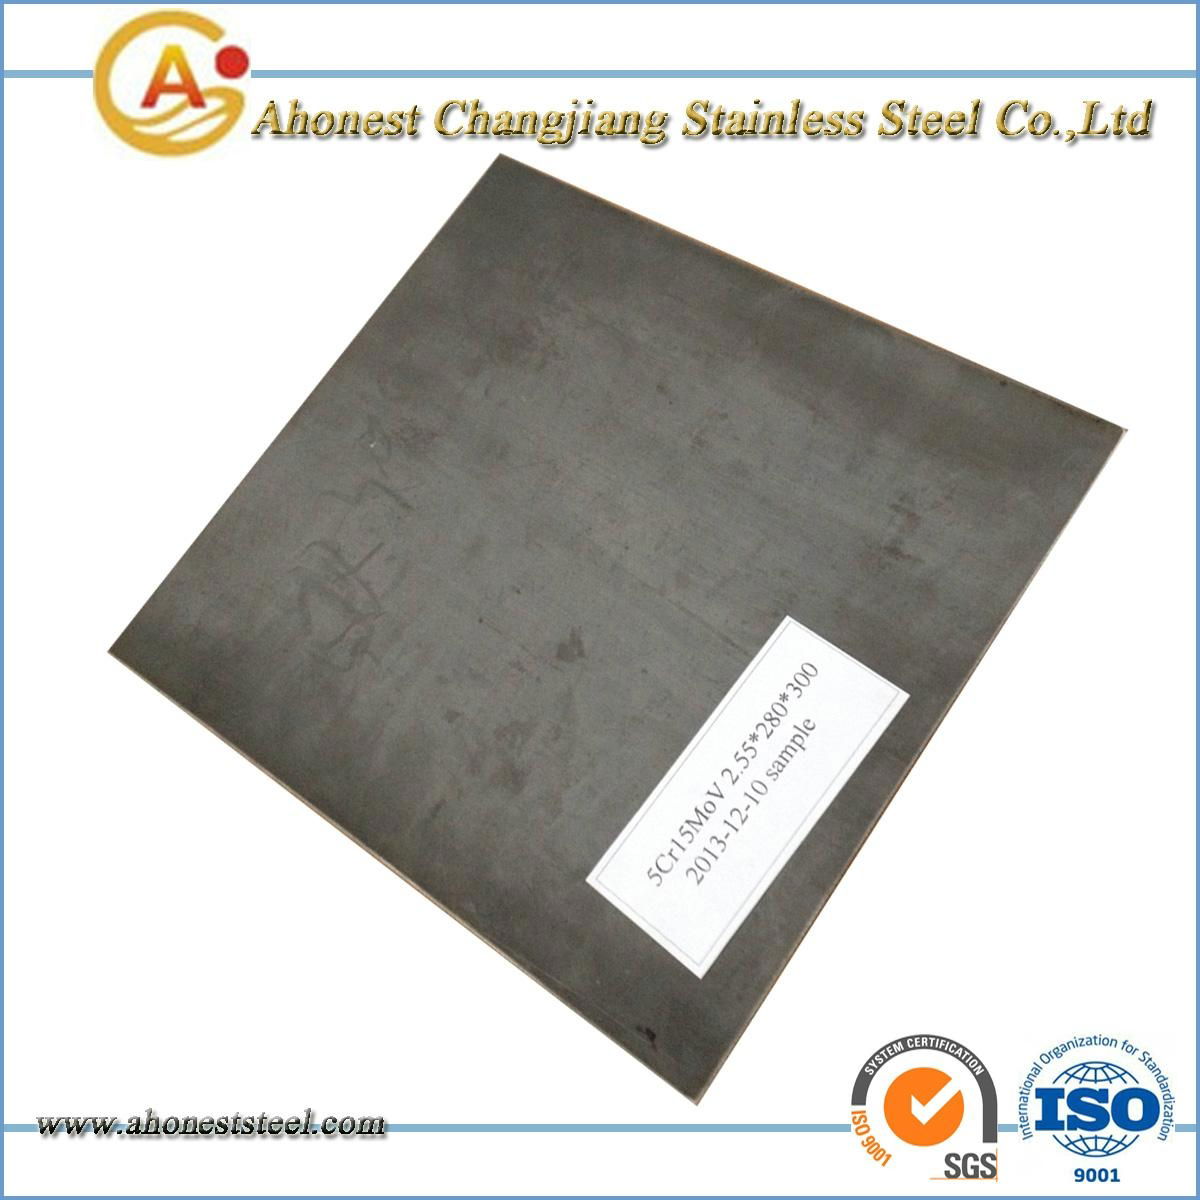 Stainless steel strip in coils 1.4117 X38CrMoV15 with high hardness